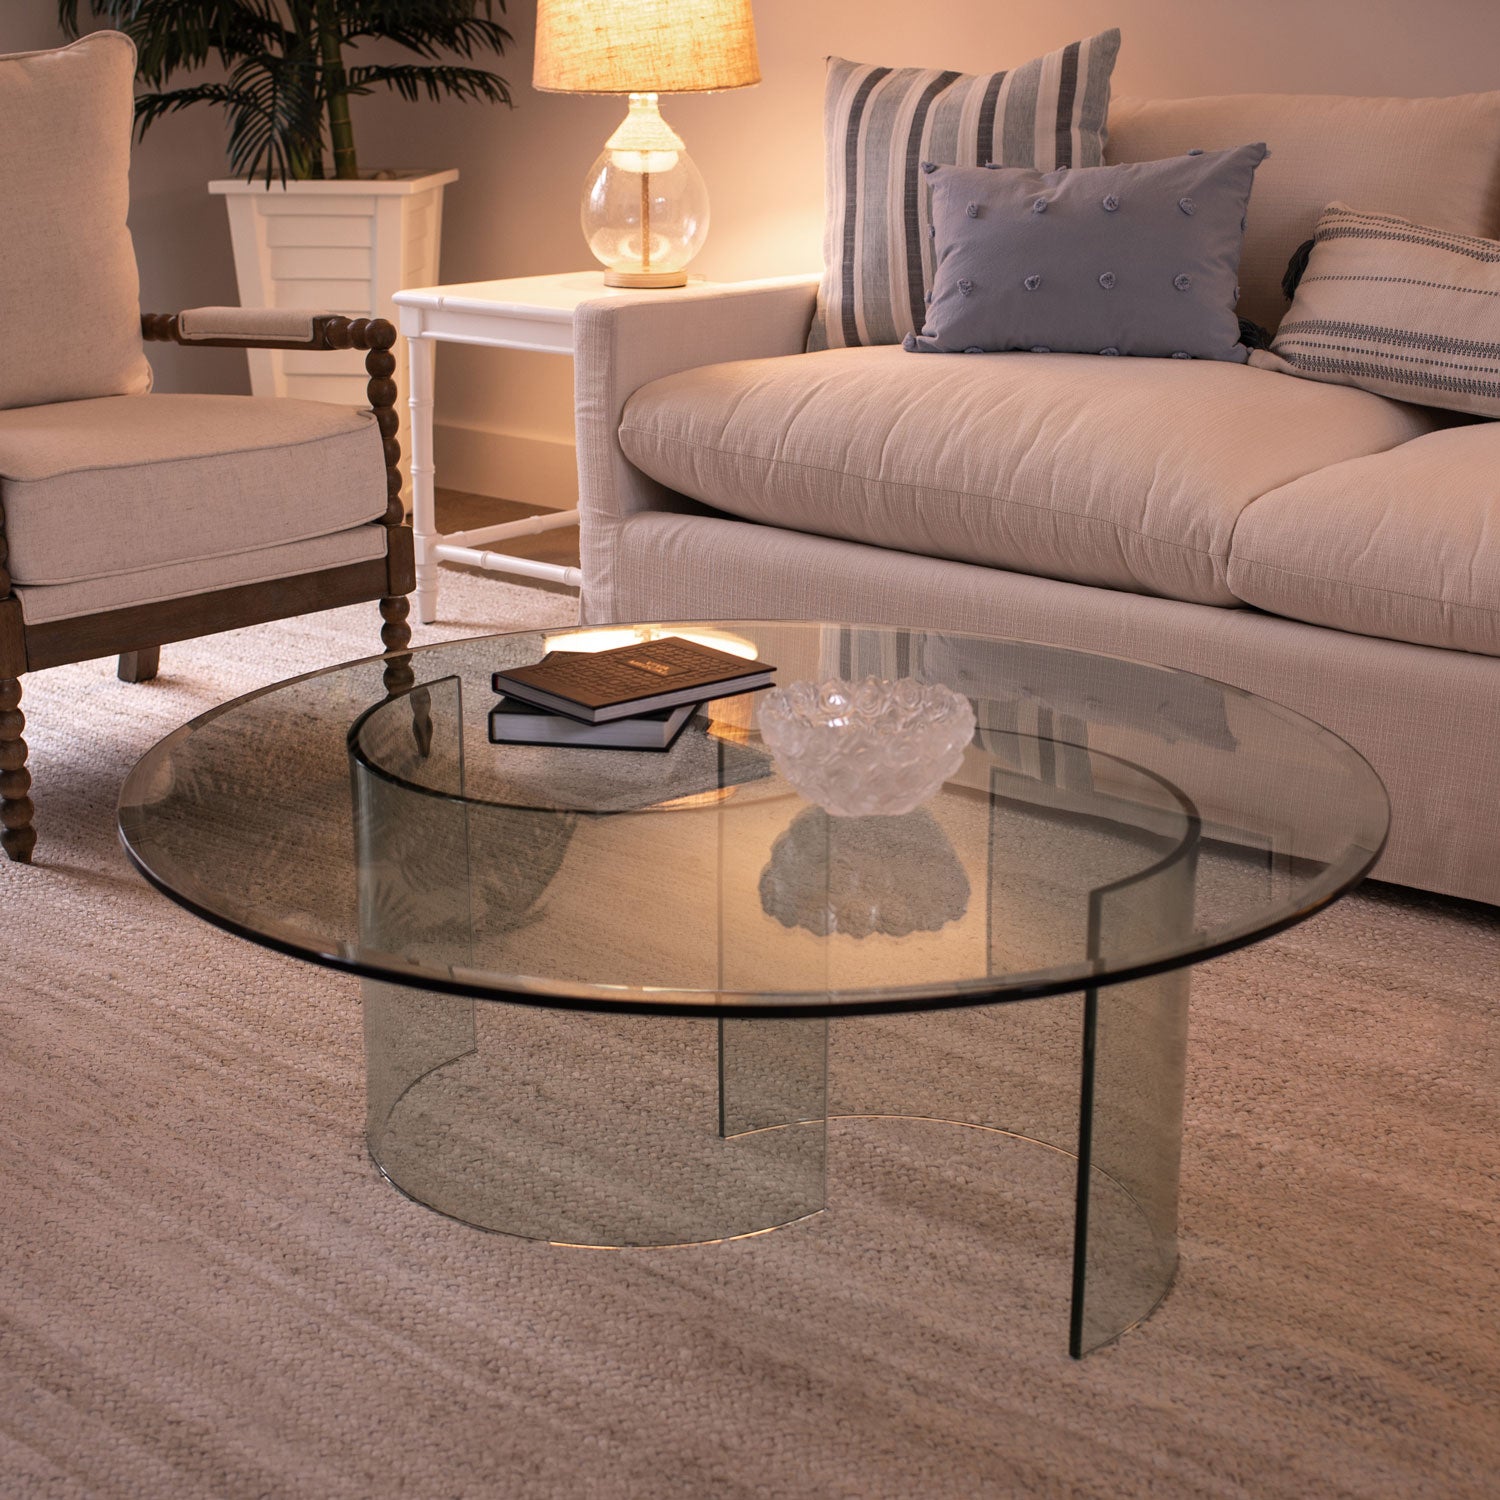 Round clear glass table with beveled edges on top of clear glass half circle base